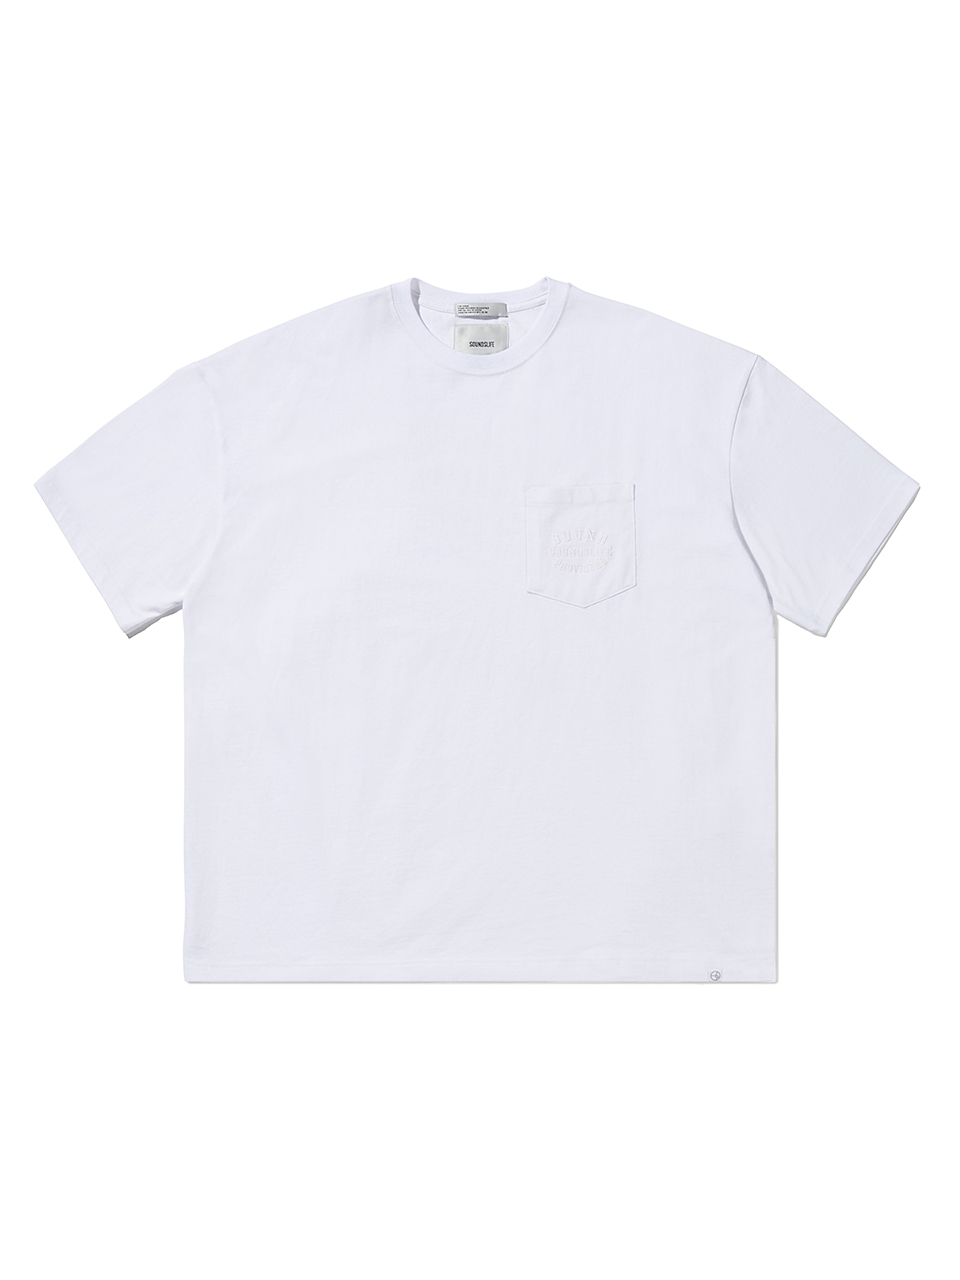 SOUNDSLIFE - Embroidery Pocket T-Shirt White